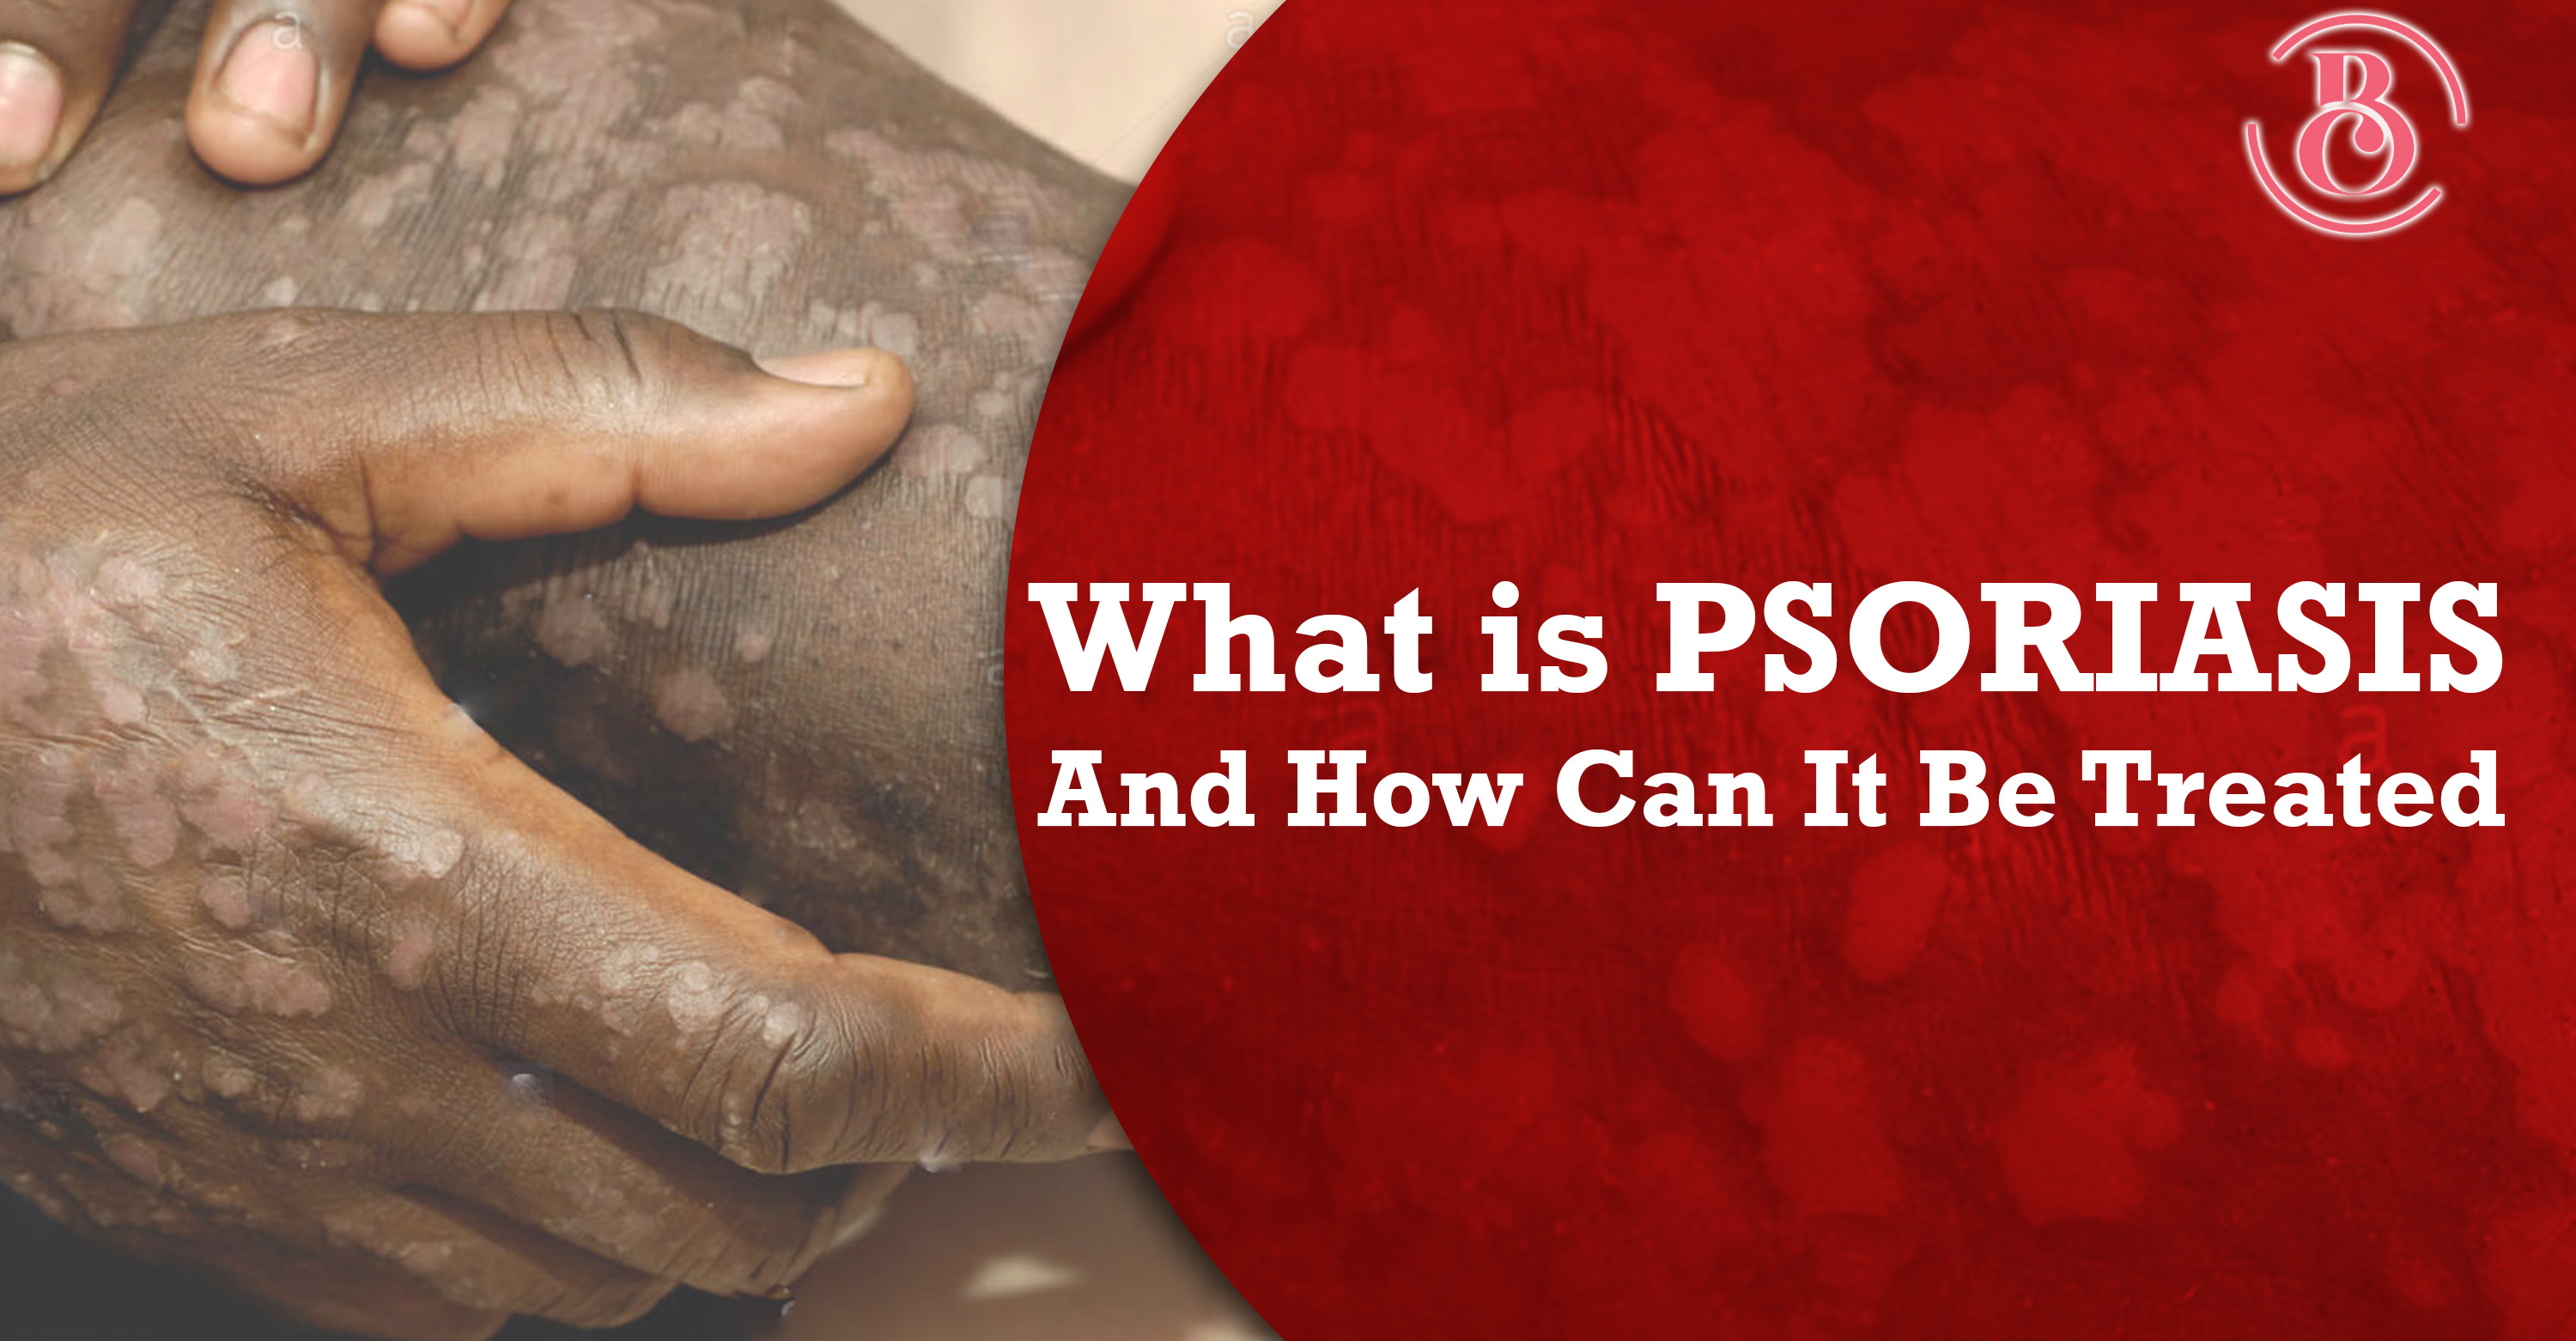 What Is Psoriasis and How Can It Be Treated?